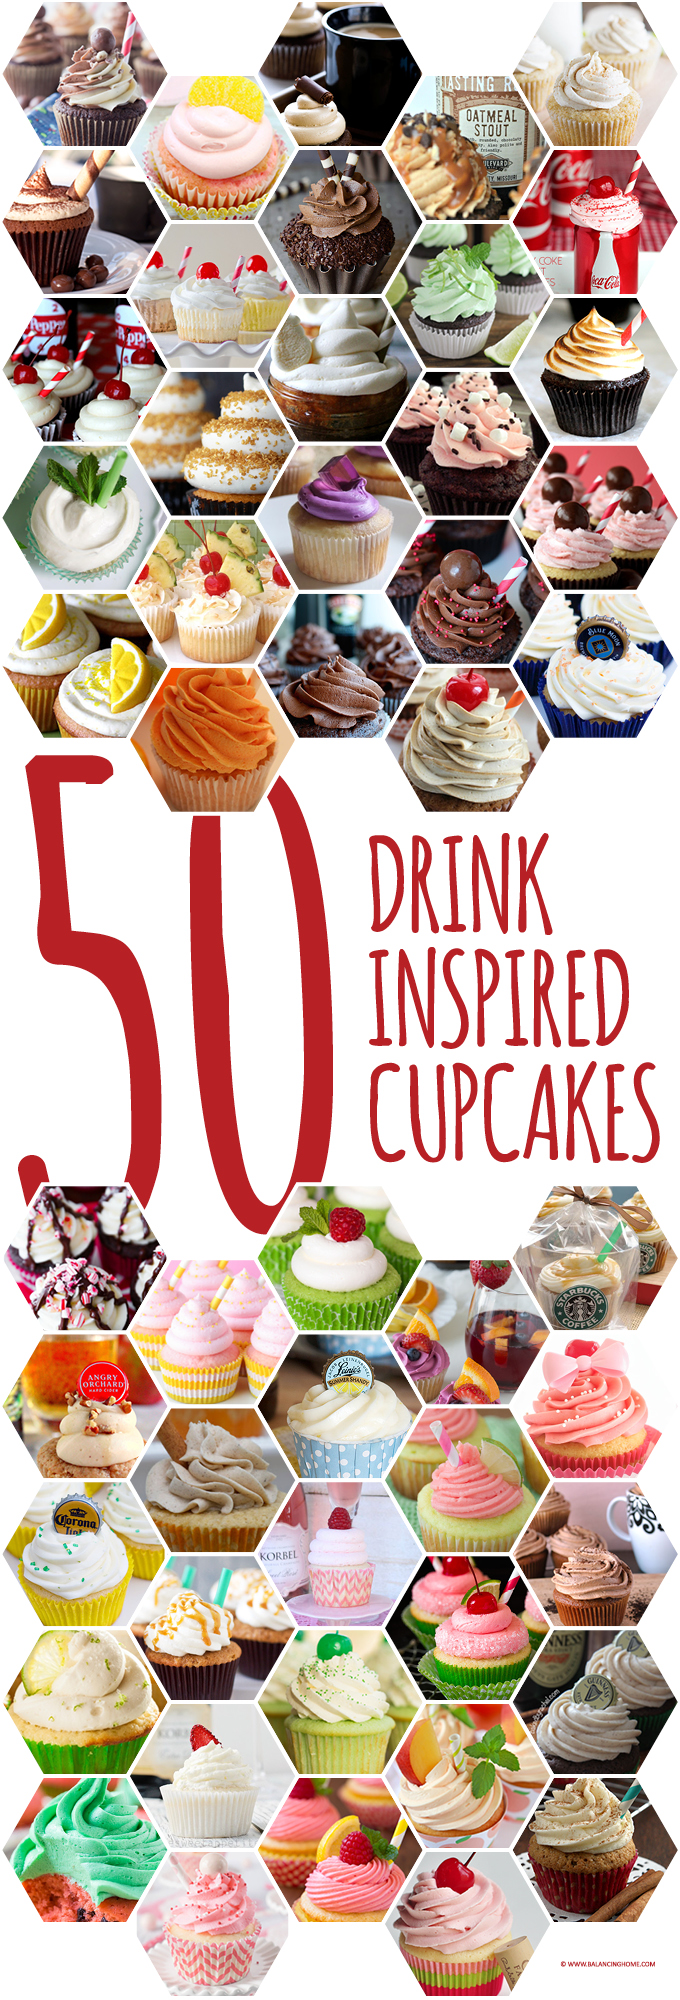 50-drink-inspired-cupcake-recipes